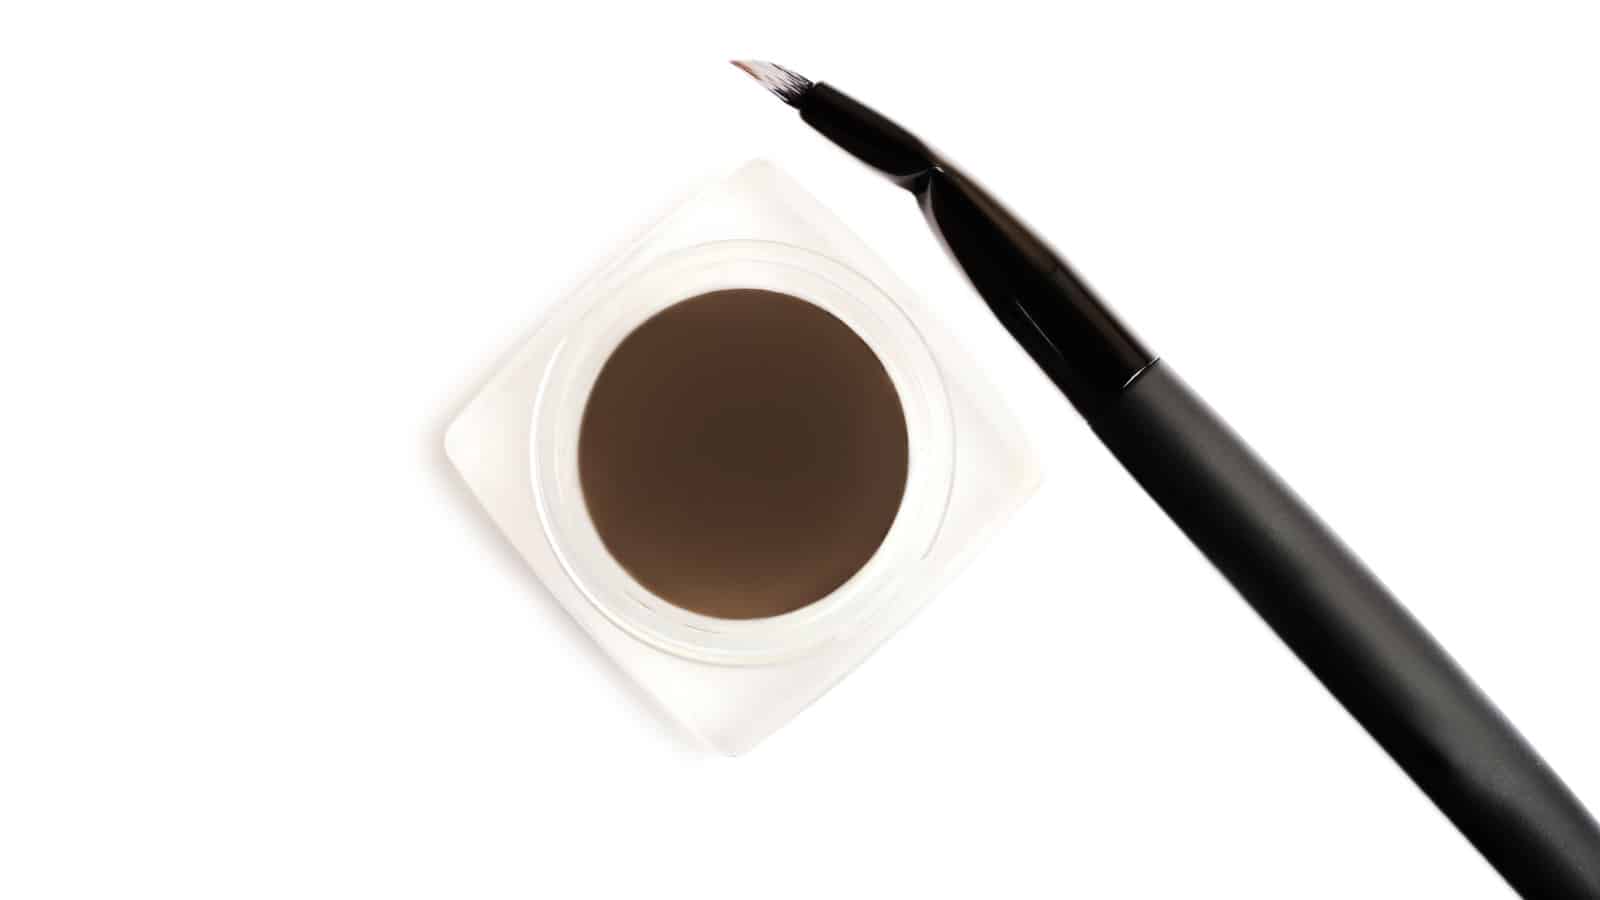 Dark brown dipbrow pomade with special brush.Eyebrow cosmetics.Make up concept.Isolated on white.